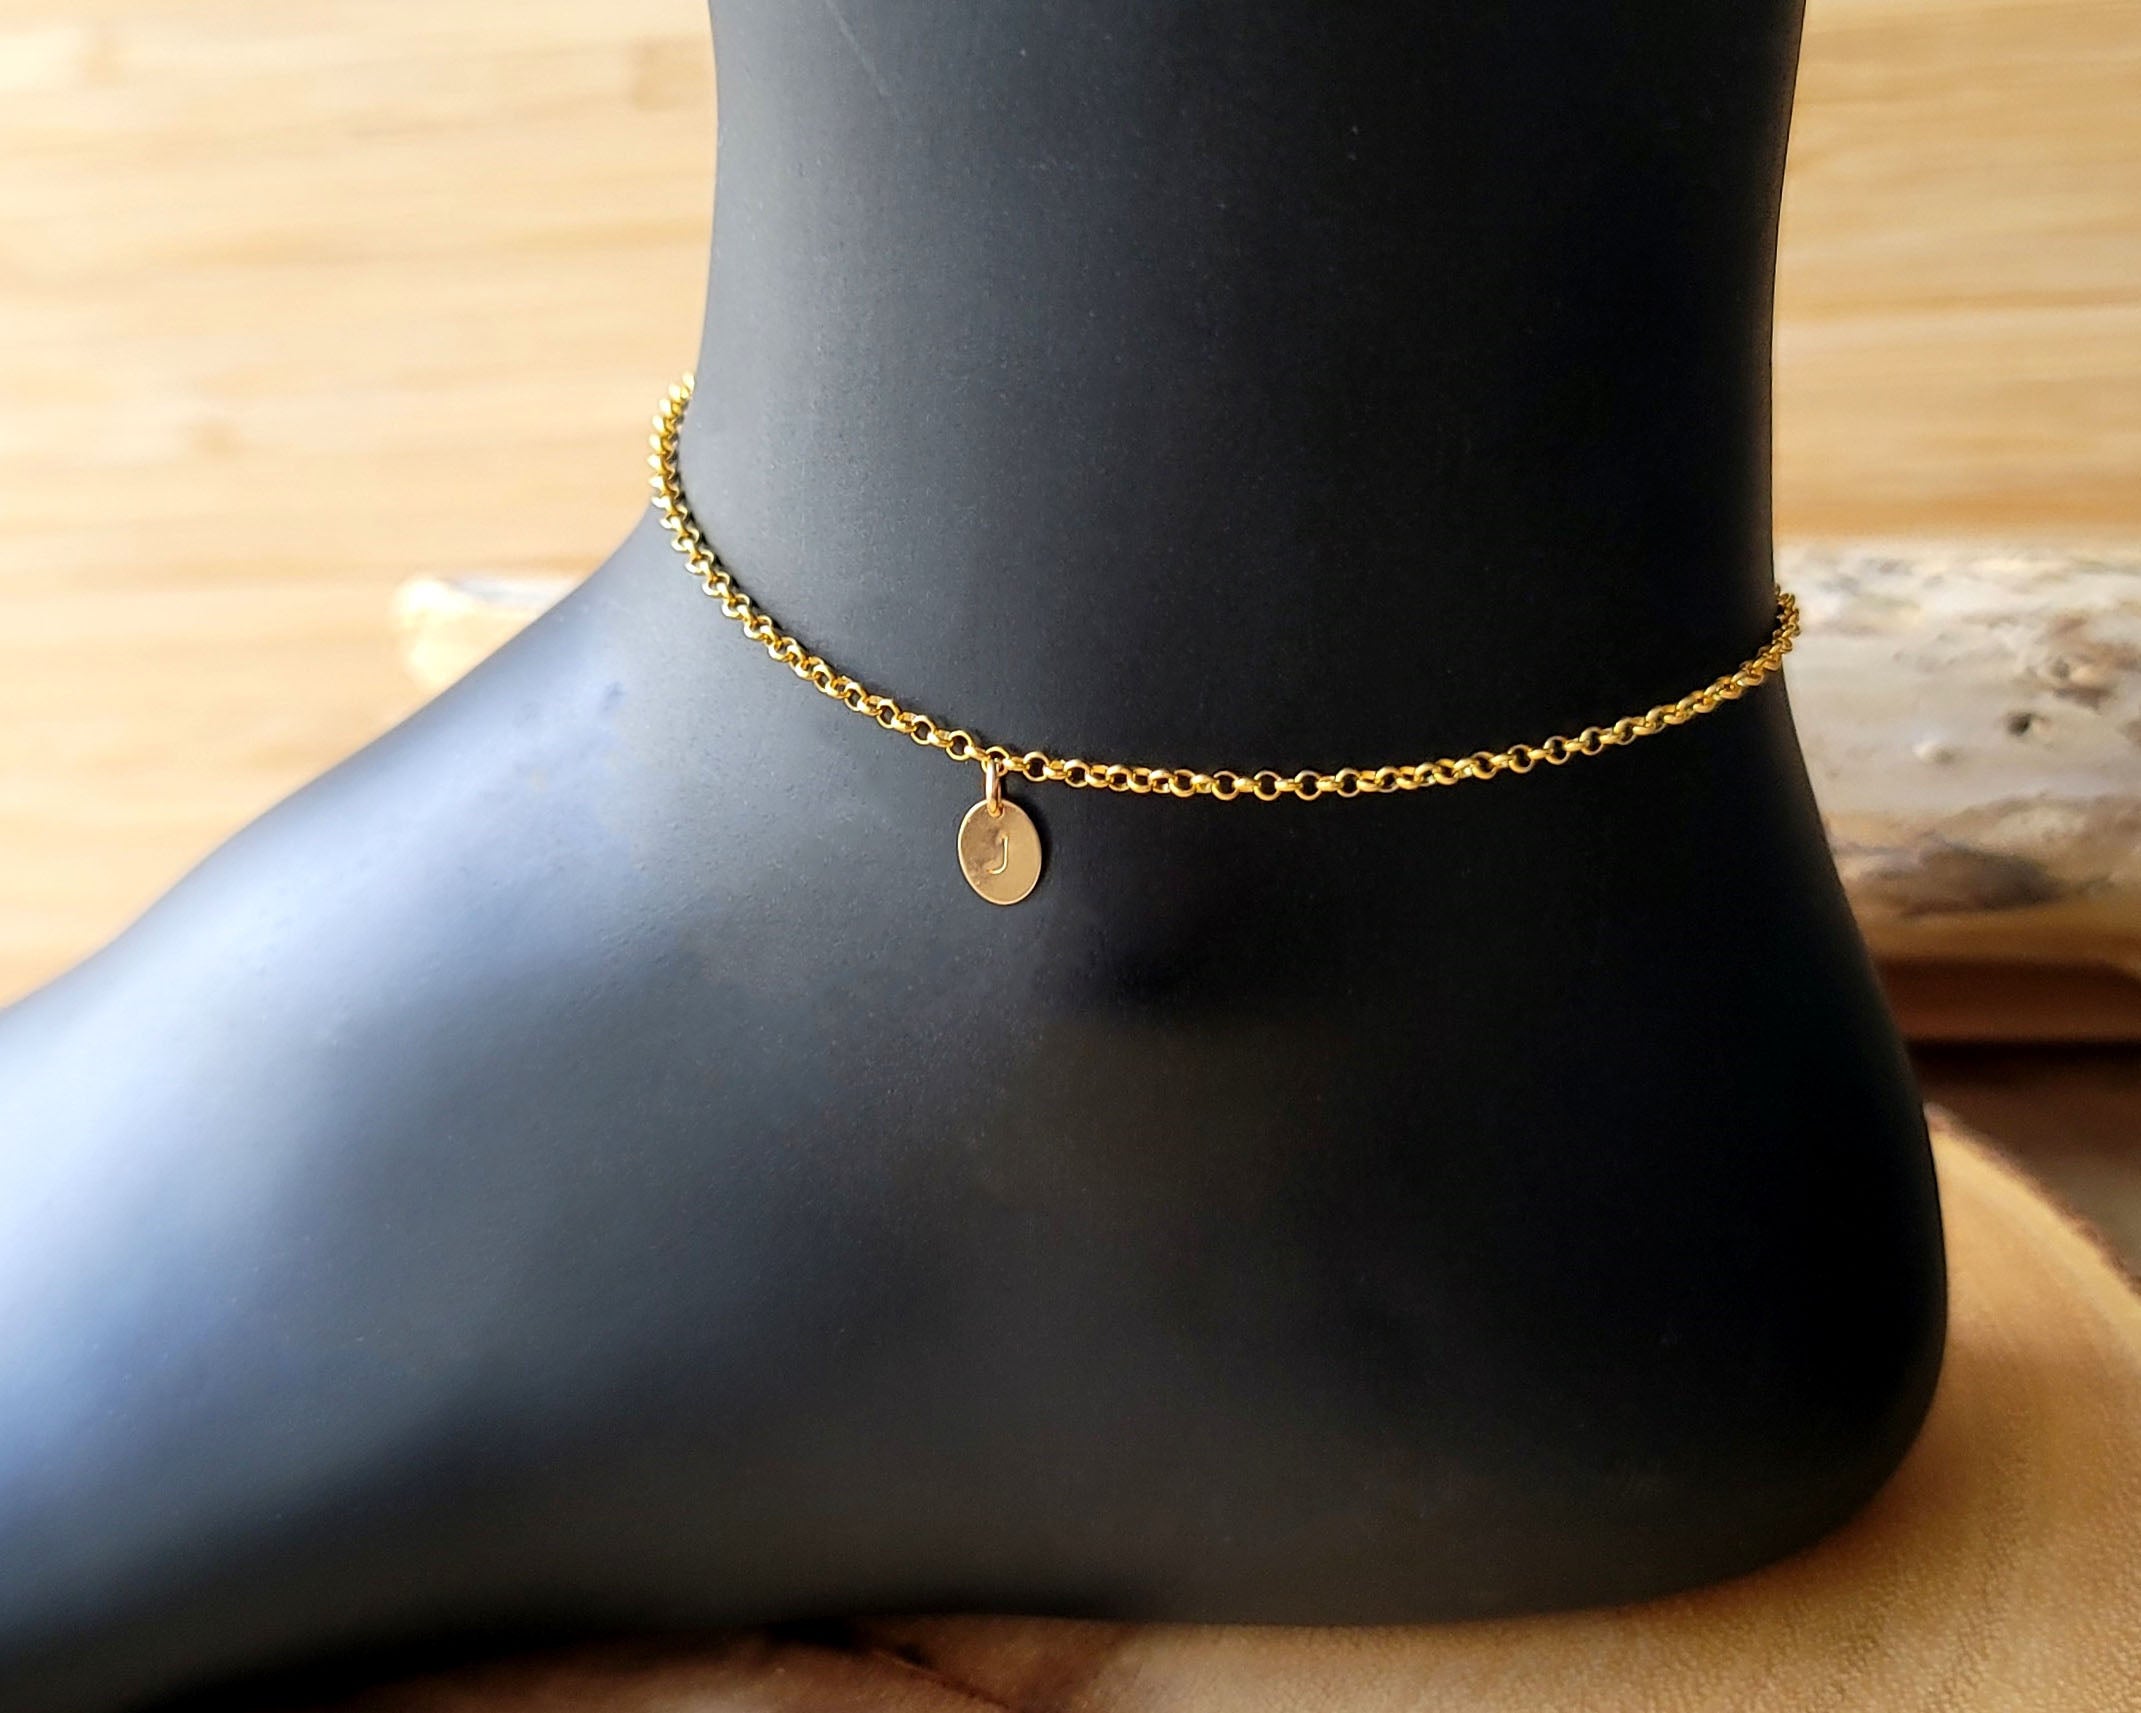 Buy Gold Anklet, Elegant 24k Gold Plated Chain Ankle Bracelet With Leaves  Charms. Chic Minimalist Delicate Jewelry, Bridal Wedding, Autumn Online in  India - Etsy